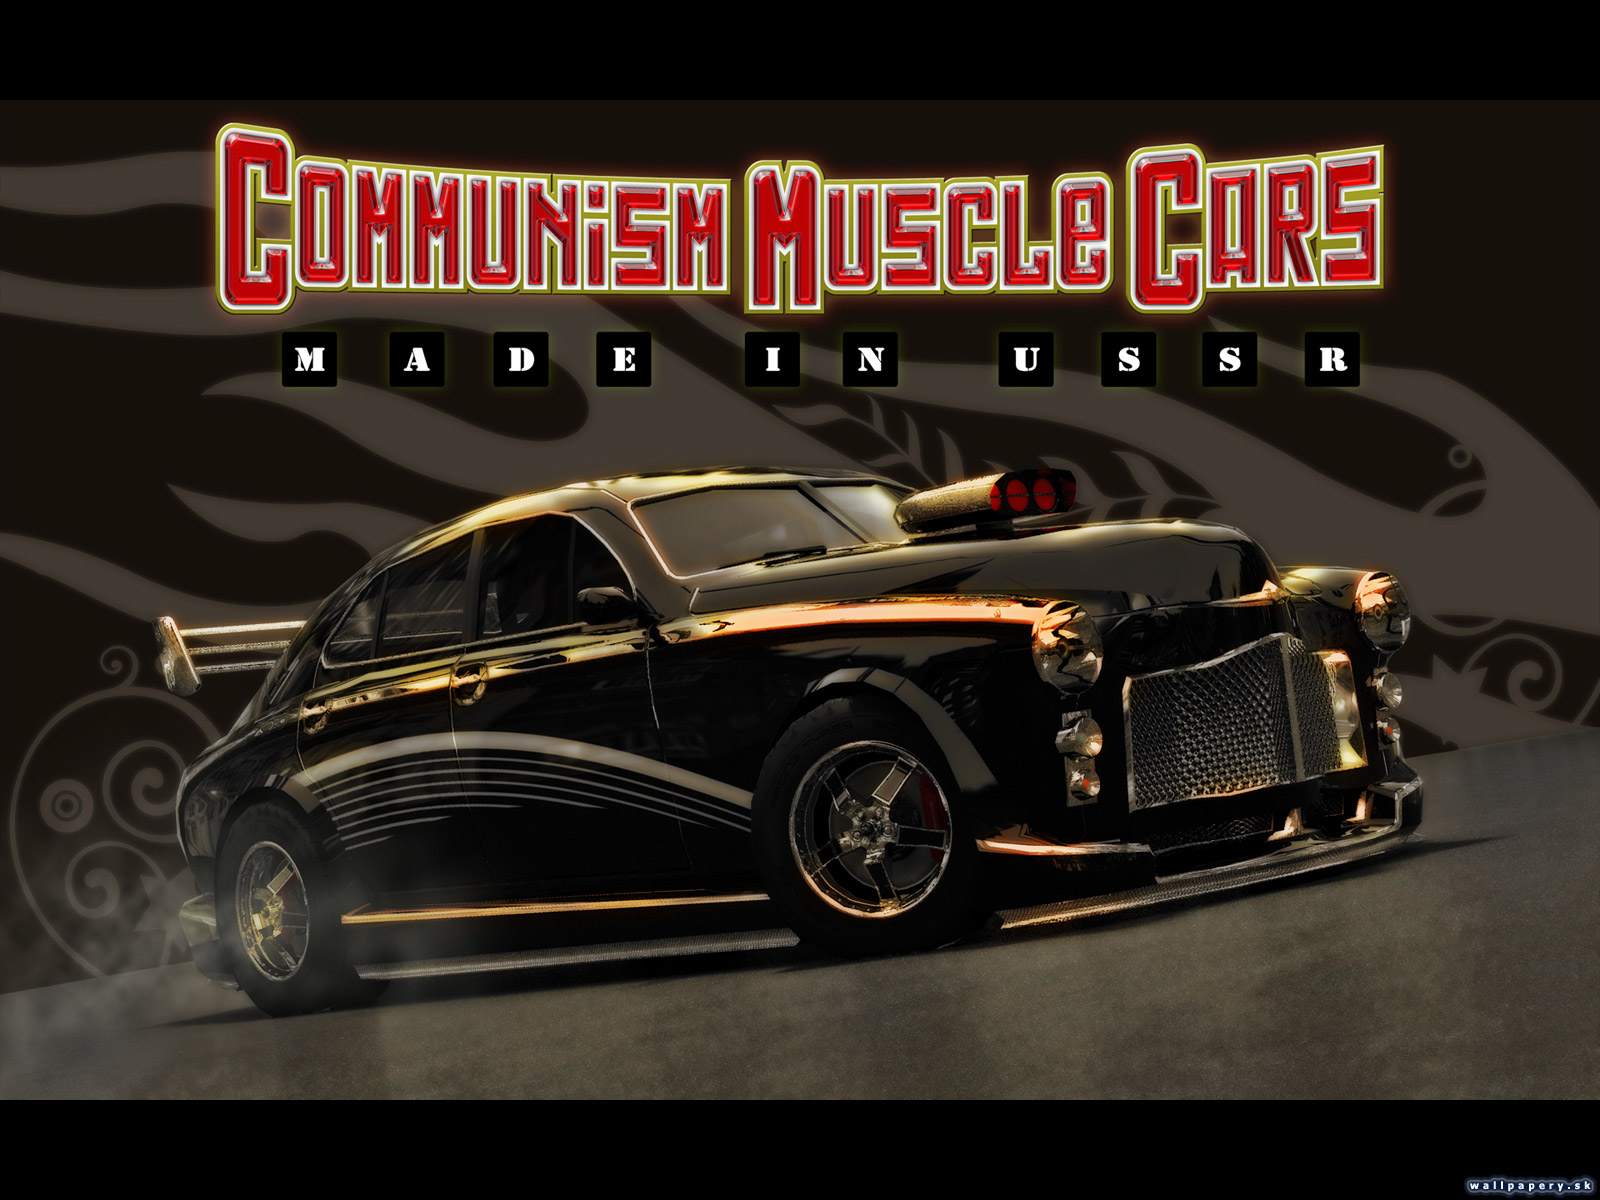 Communism Muscle Cars: Made in USSR - wallpaper 3